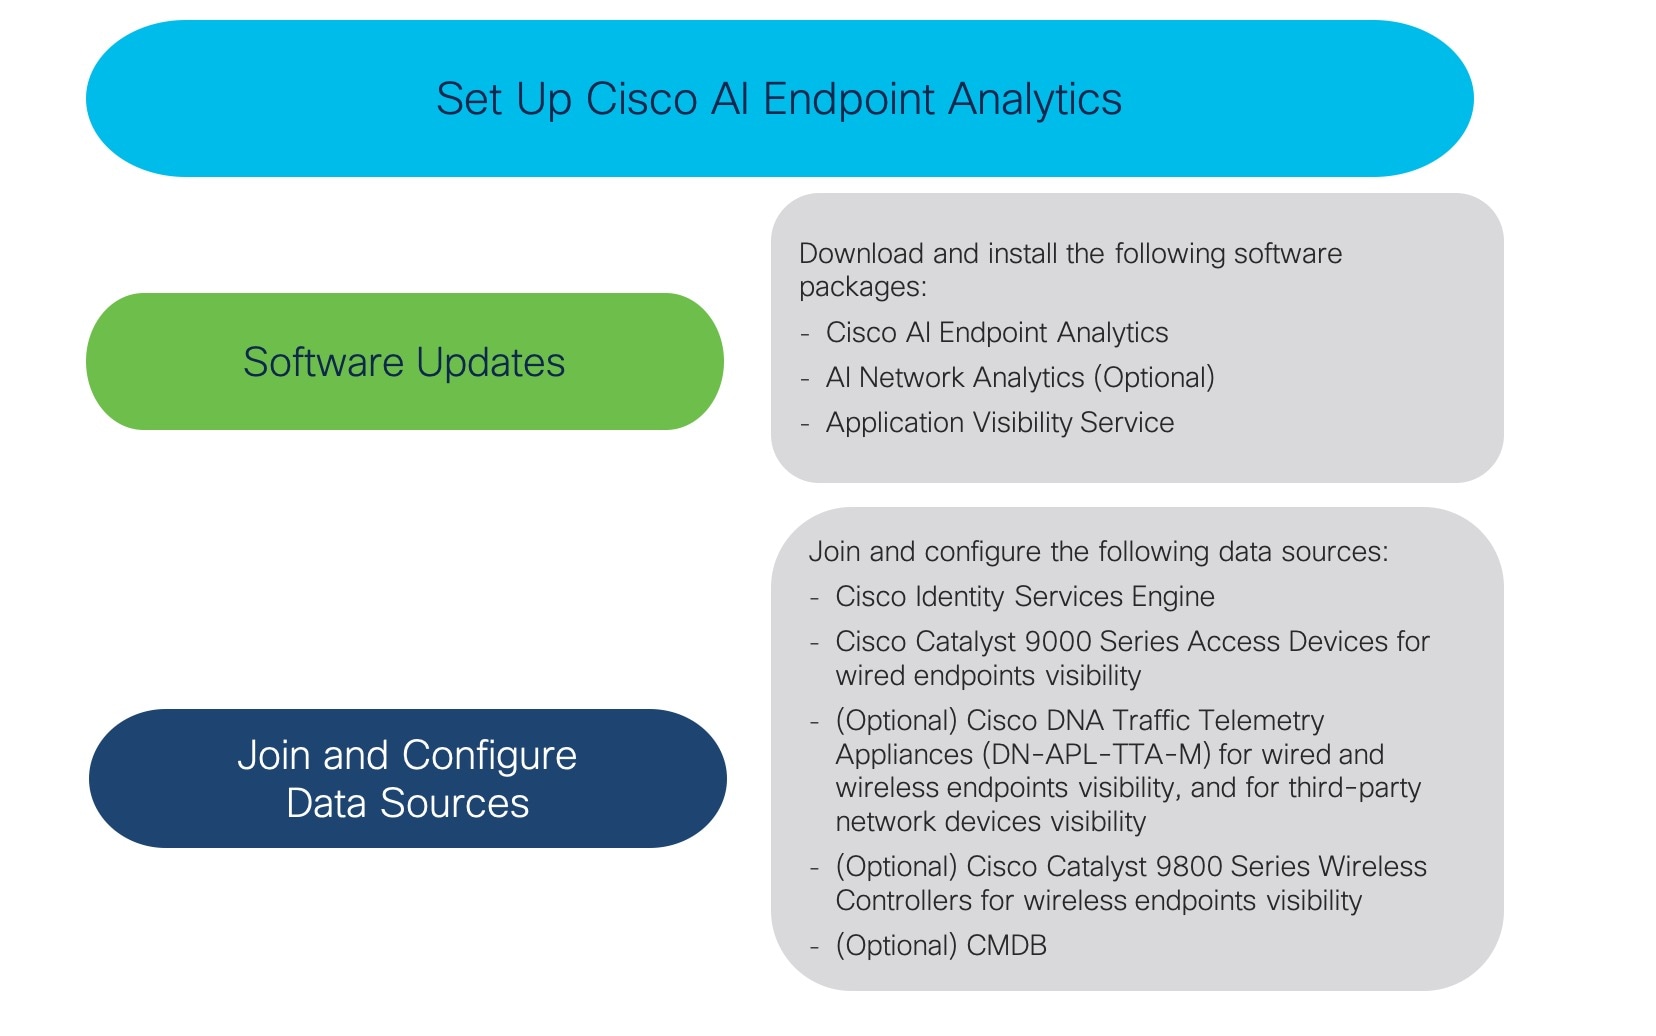 Slide of setting up Cisco AI Endpoint Analytics.